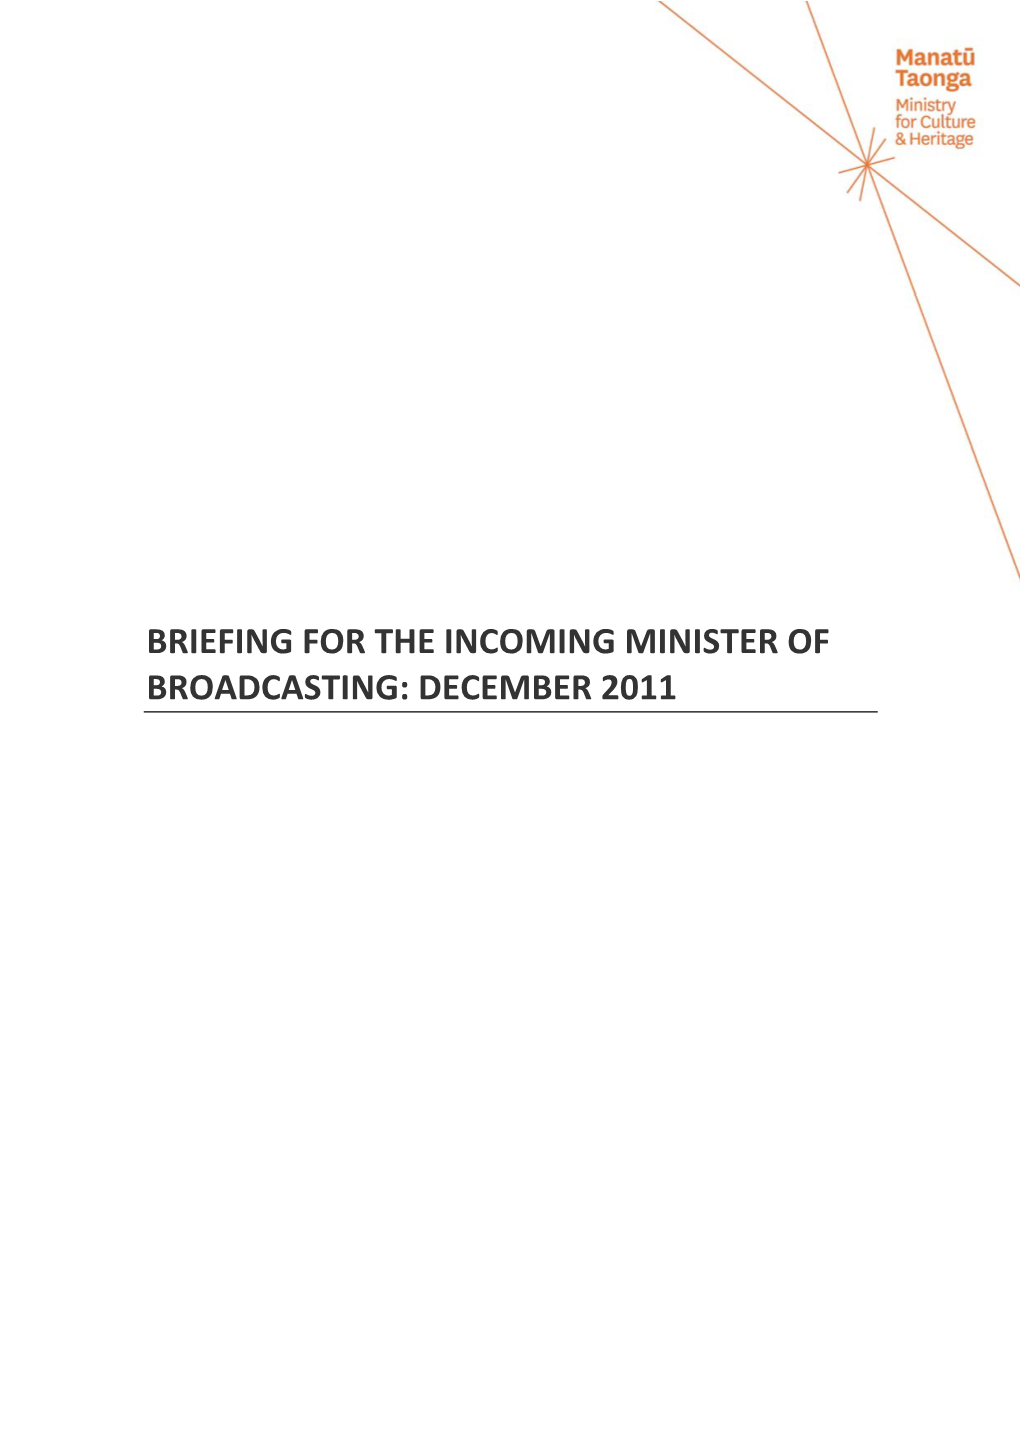 Briefing for the Incoming Minister of Broadcasting: December 2011